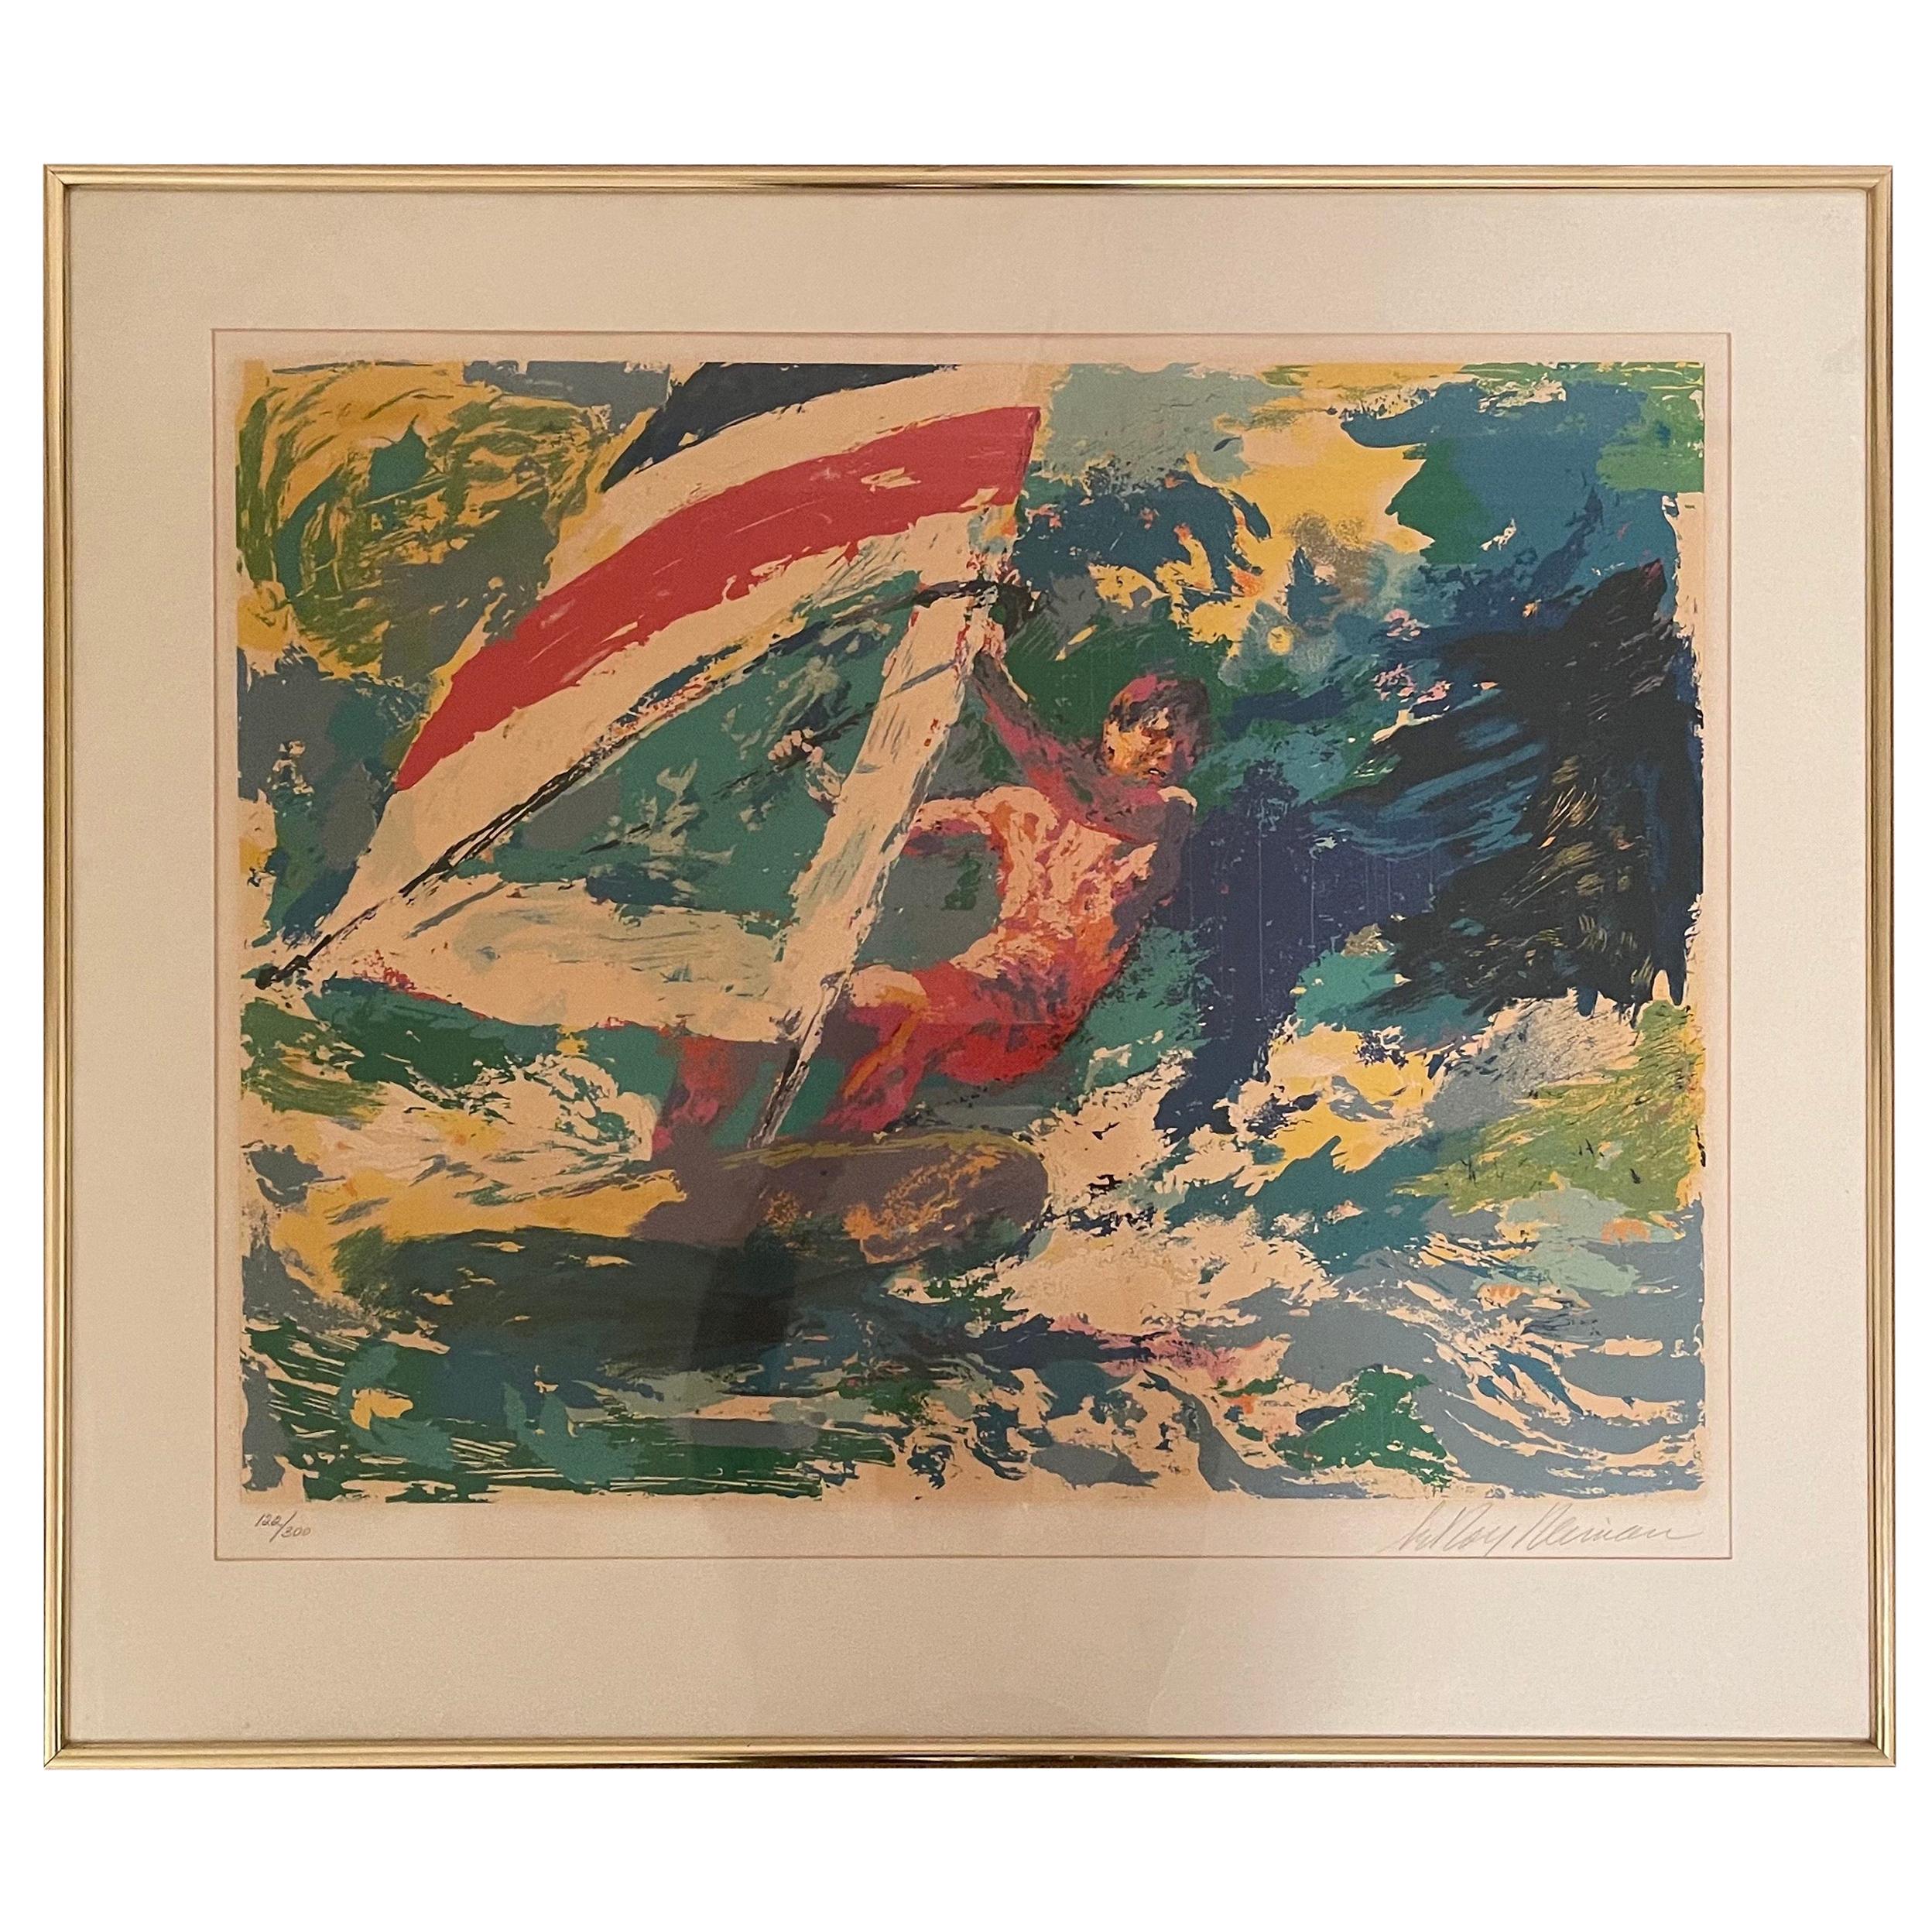 Hand Signed Limited Edition Serigraph "Windsurfer" by Leroy Neiman